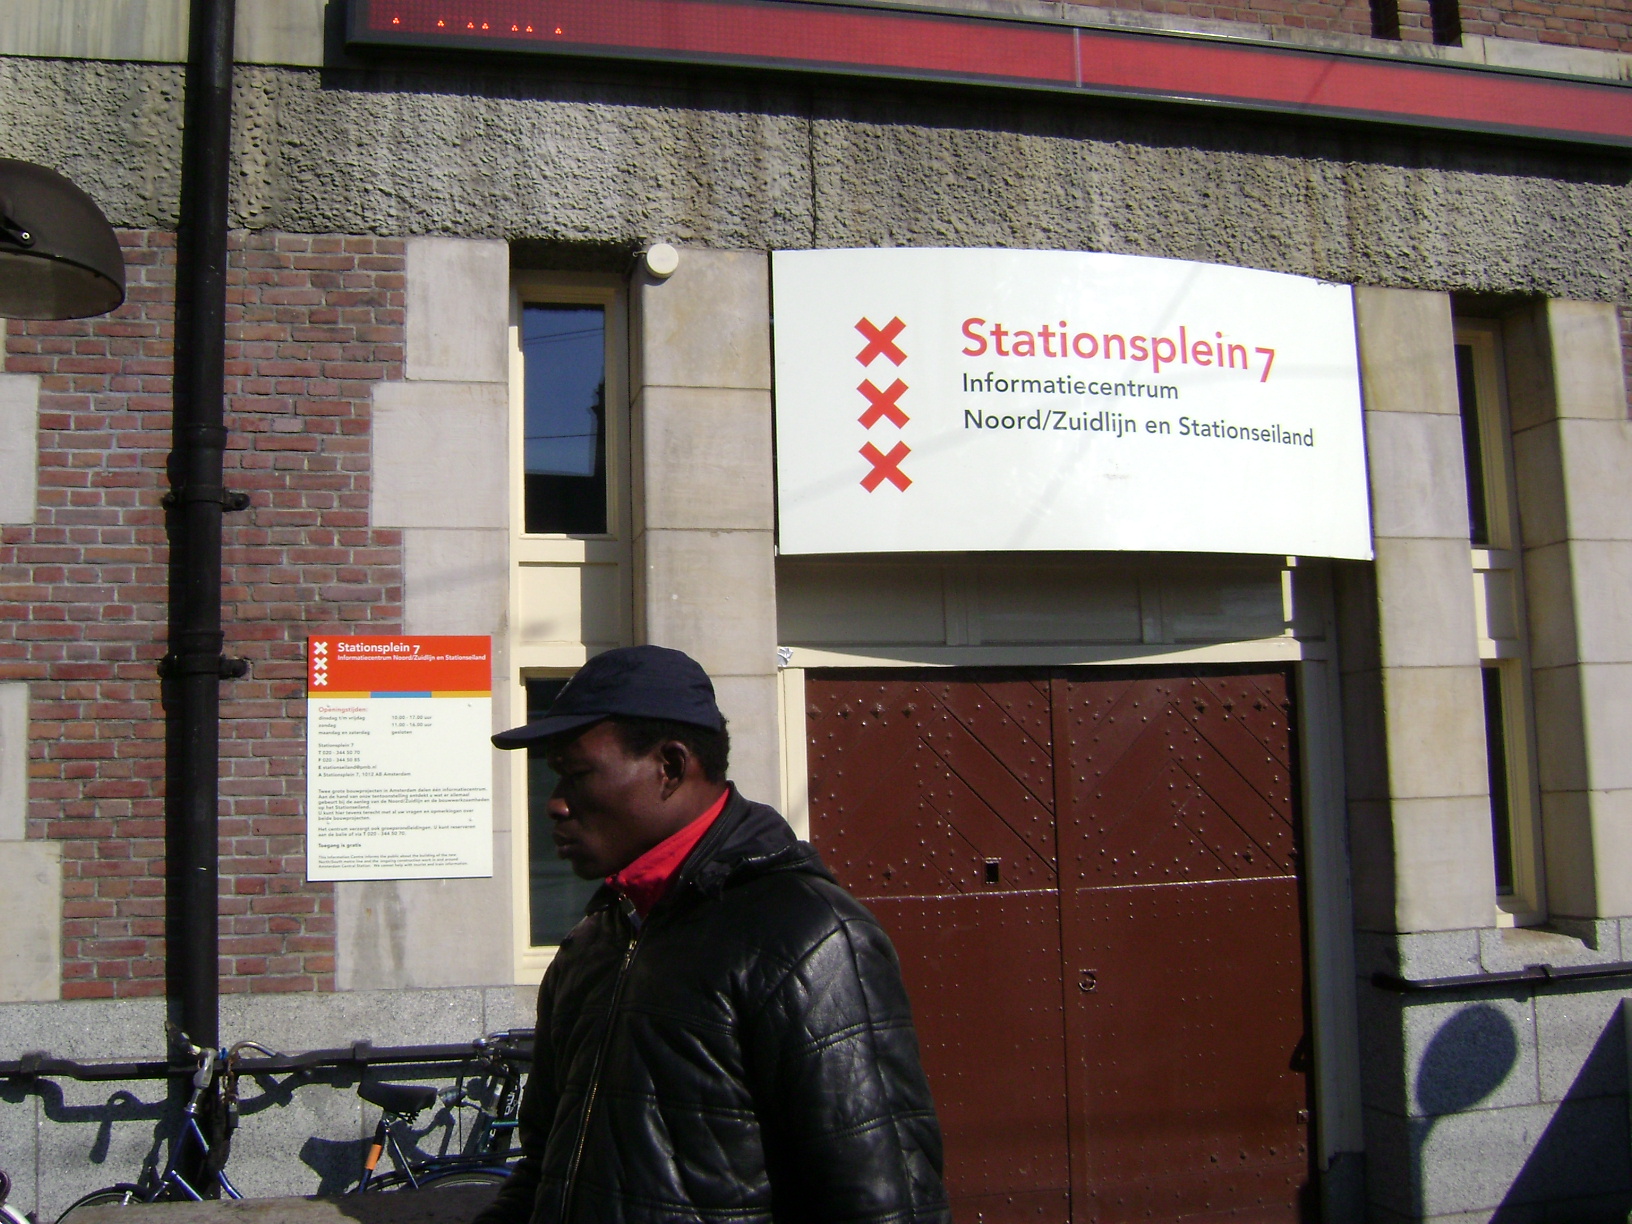 a man is walking by a building in an urban setting